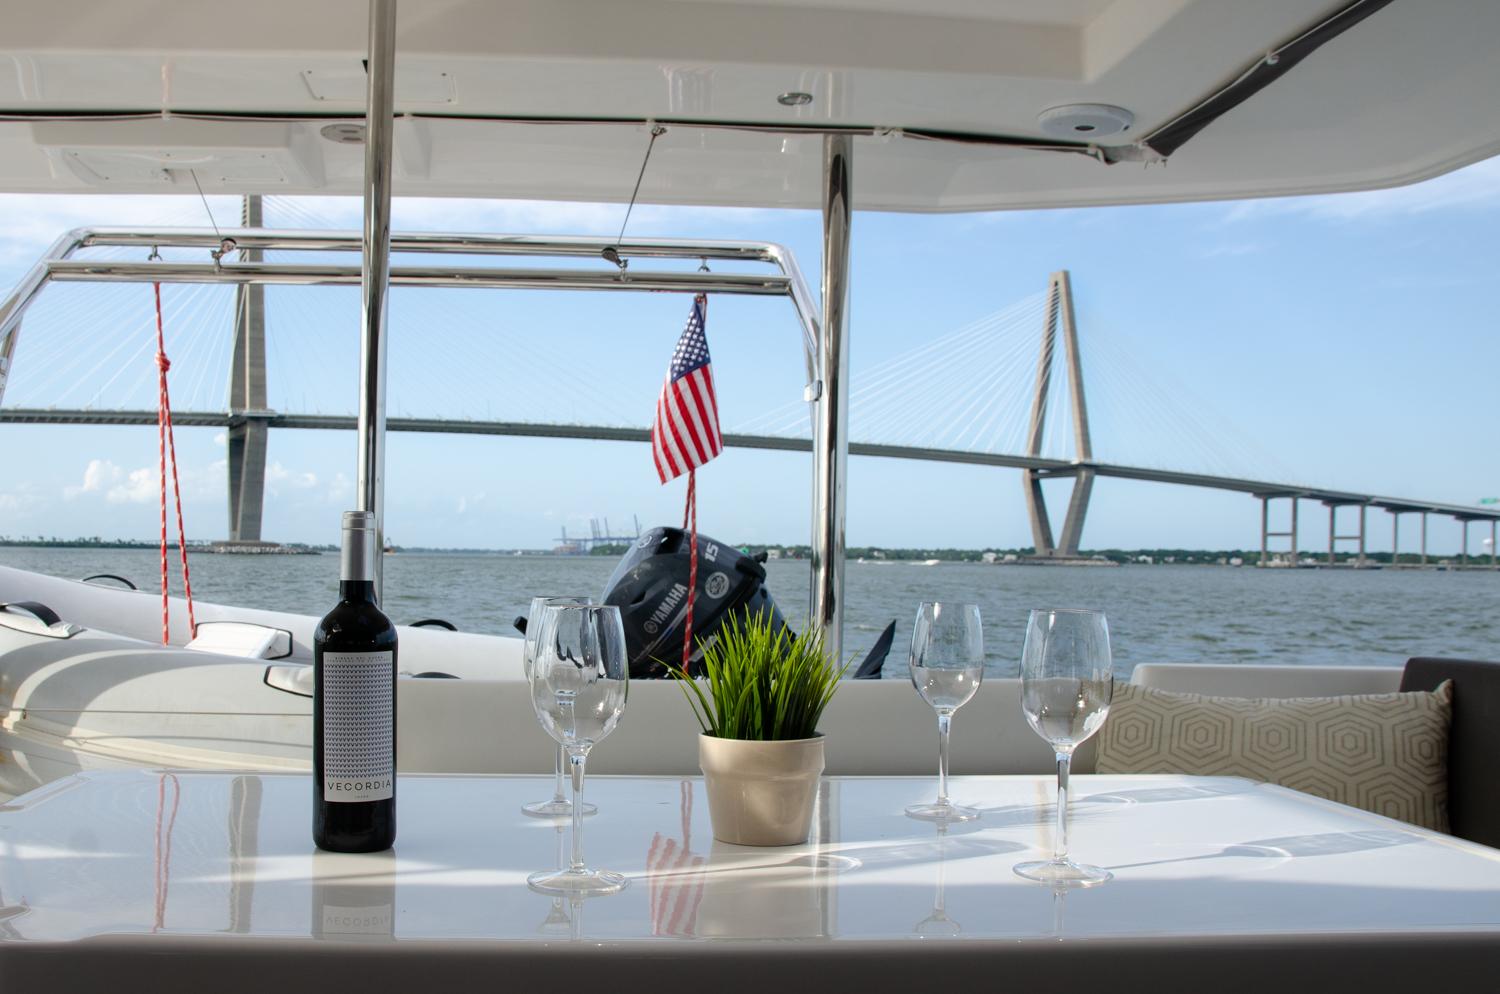 Enjoy views of the Ravenel Bridge from your sailboat charter.